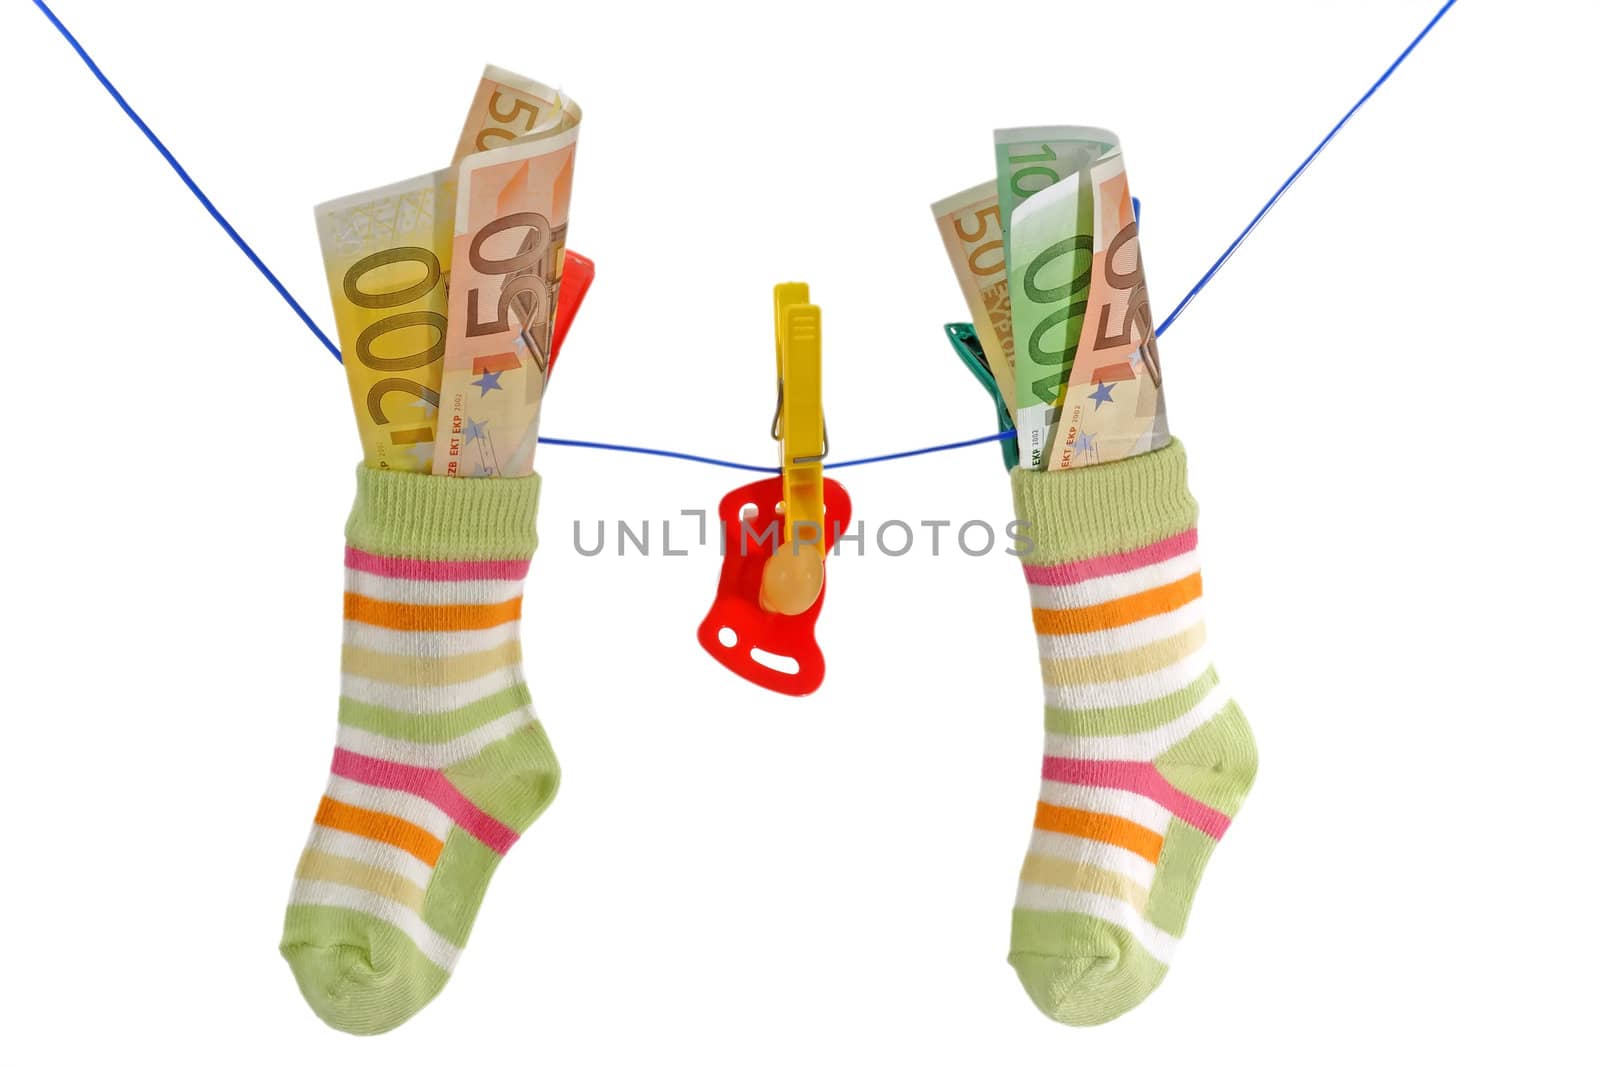 Baby socks with pacifier and euro banknotes on aclothline. Isolated on white background.